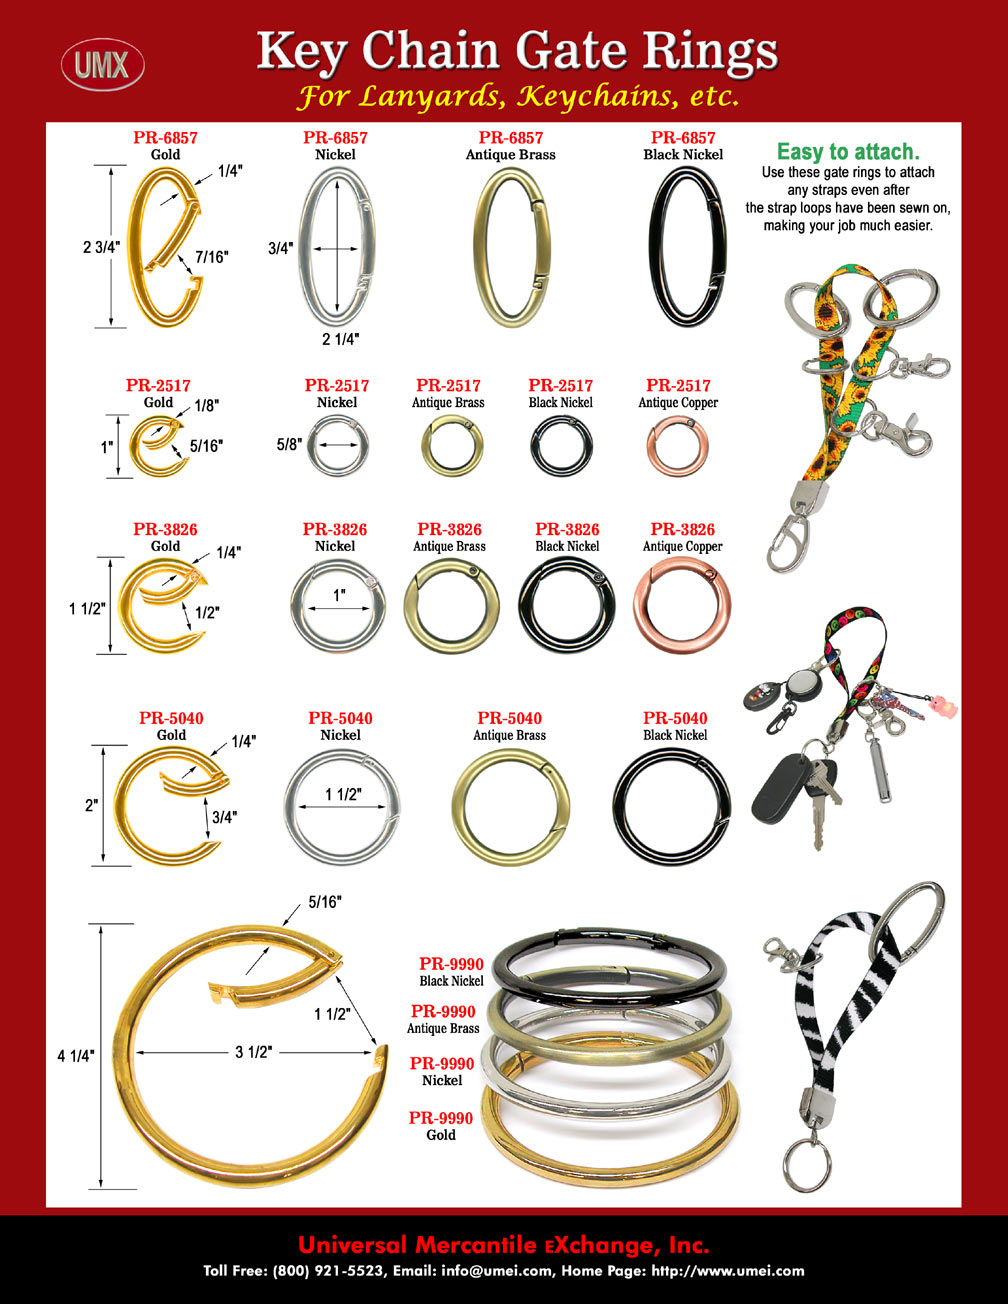 We design and manufacture a great selection of multiple function key chain gate rings for key holders.